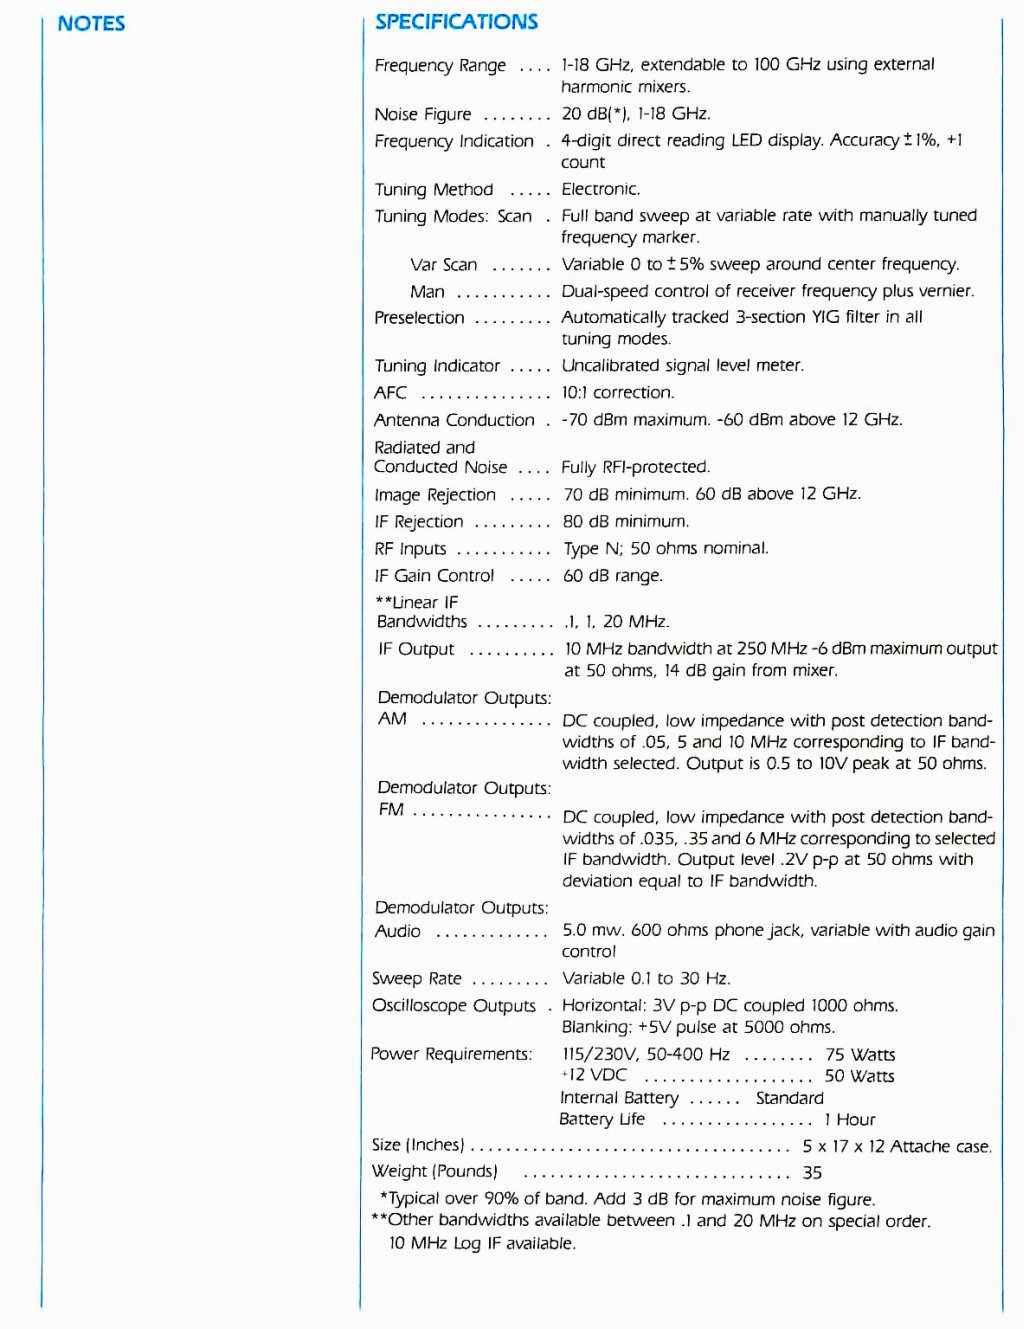 msr-902 specifications